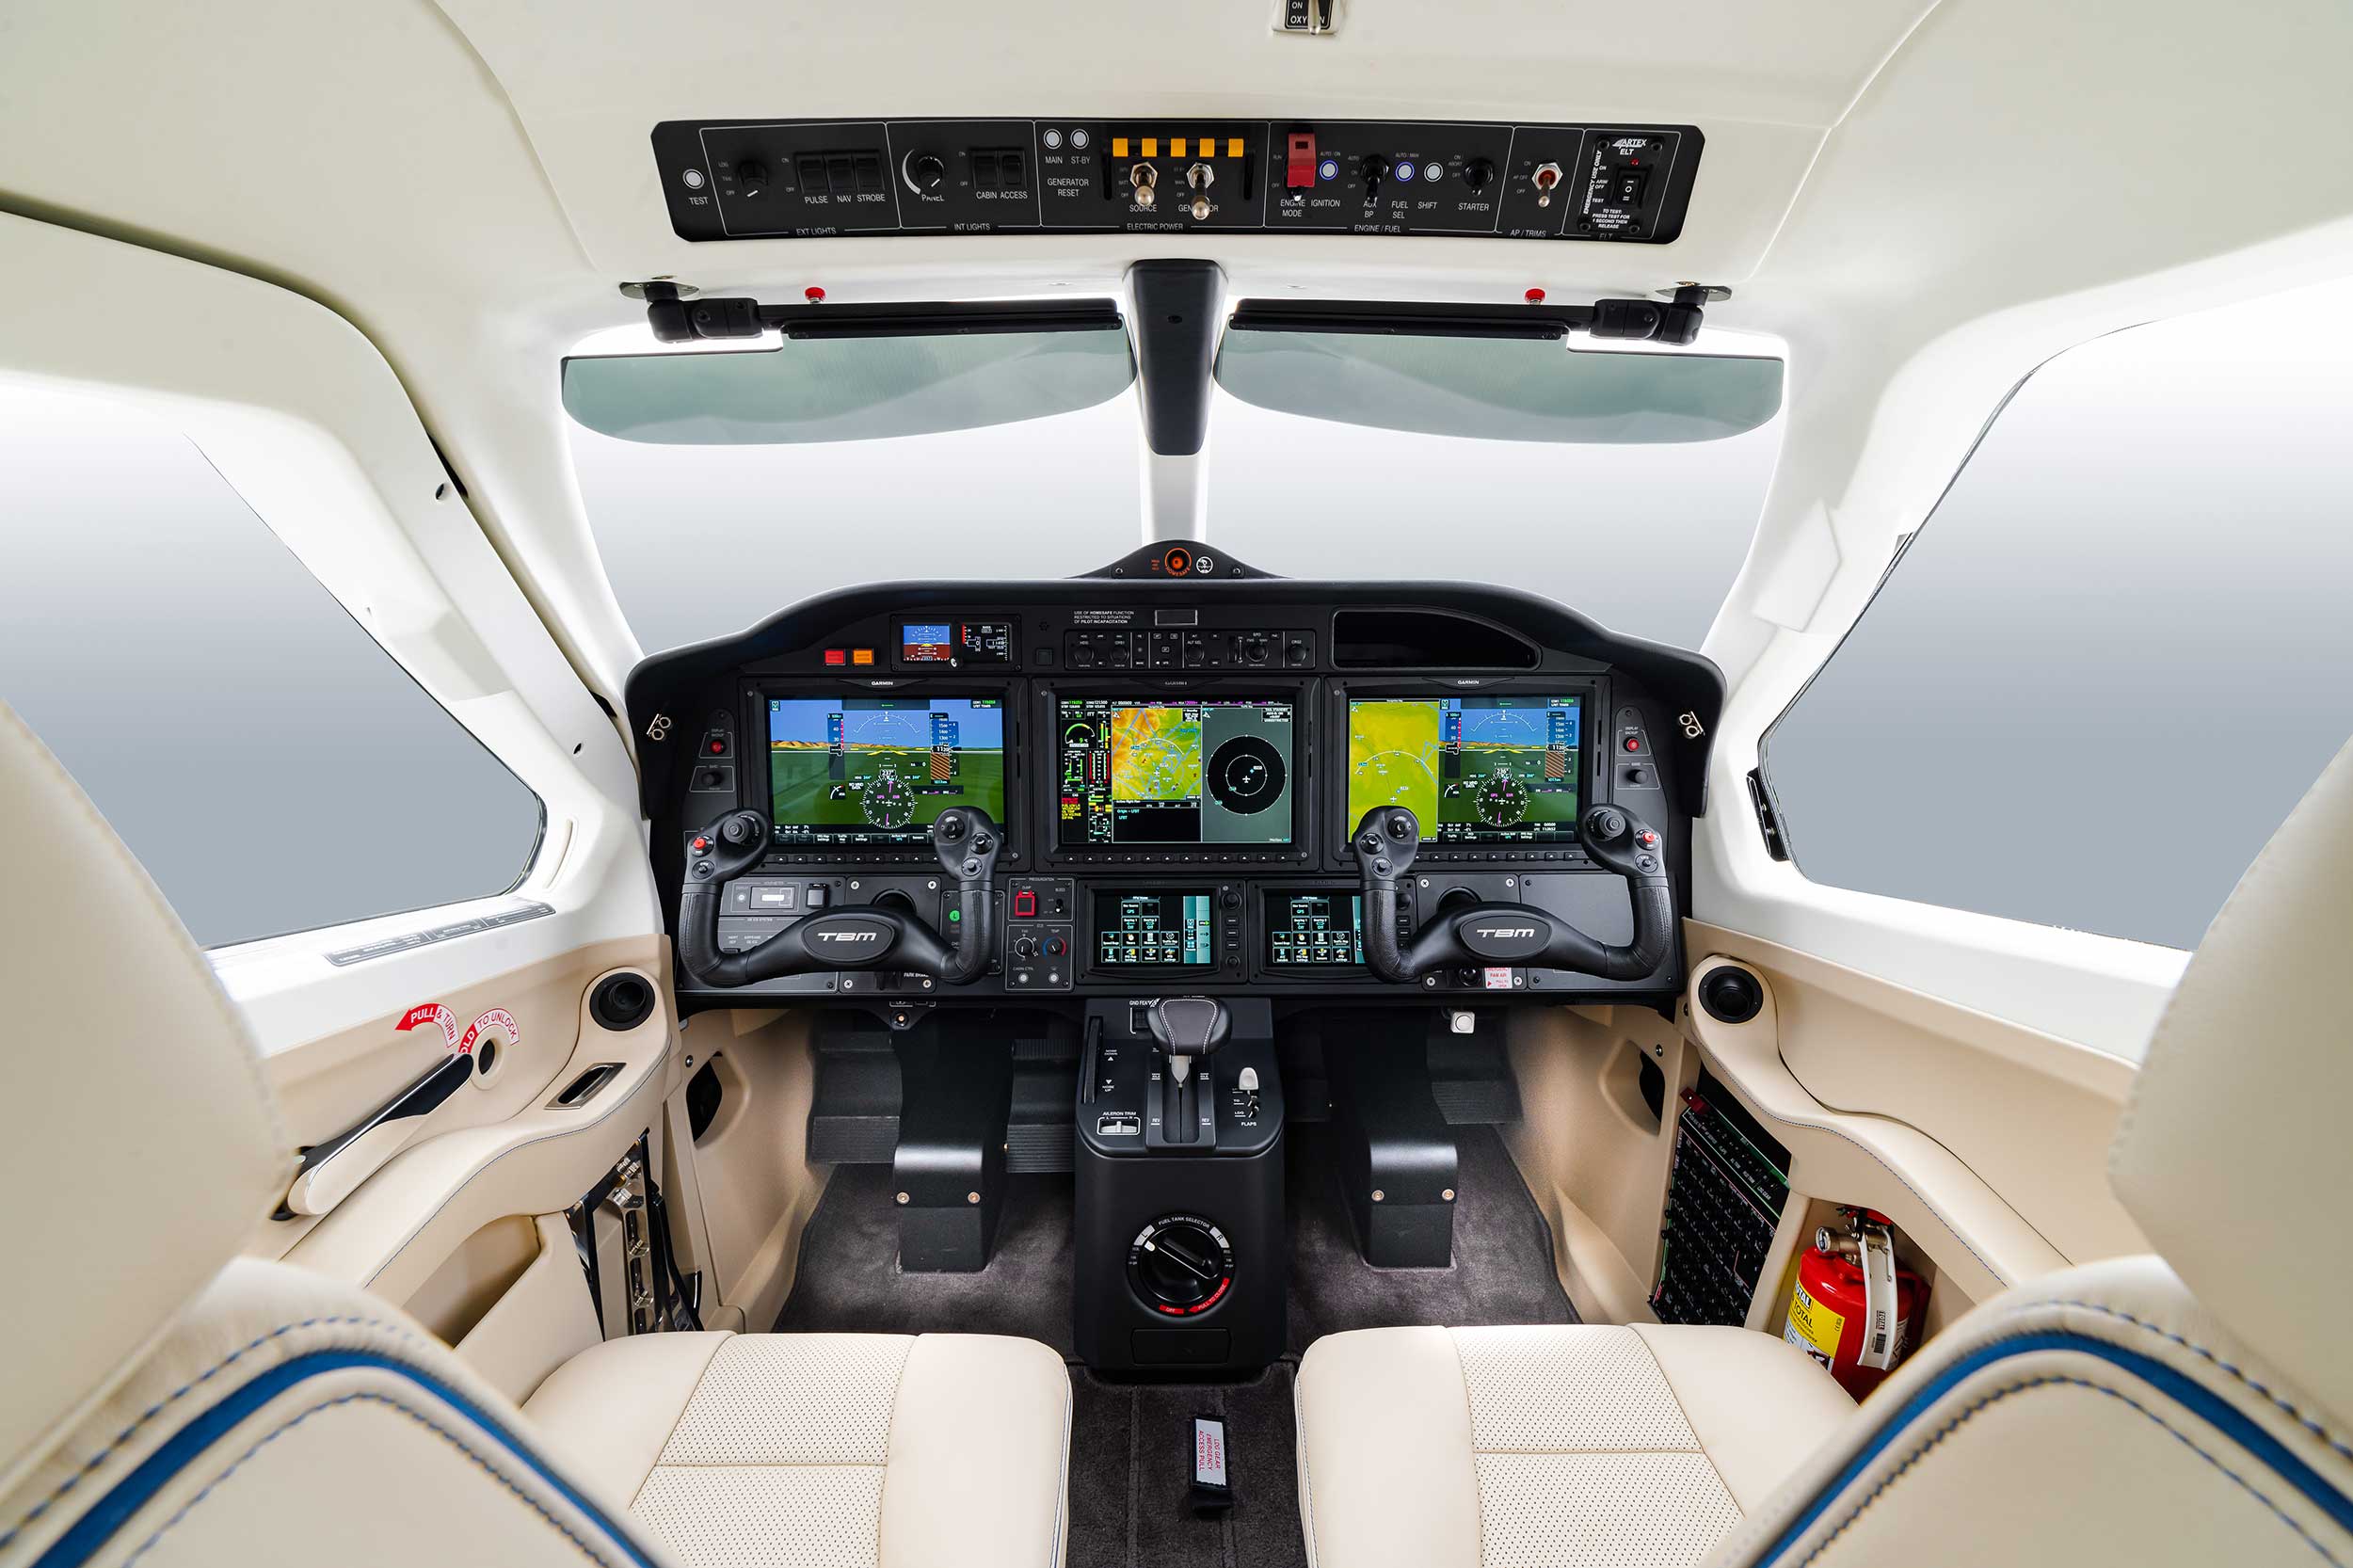 Black too dark for your dream TBM 960 cockpit? How about cream?